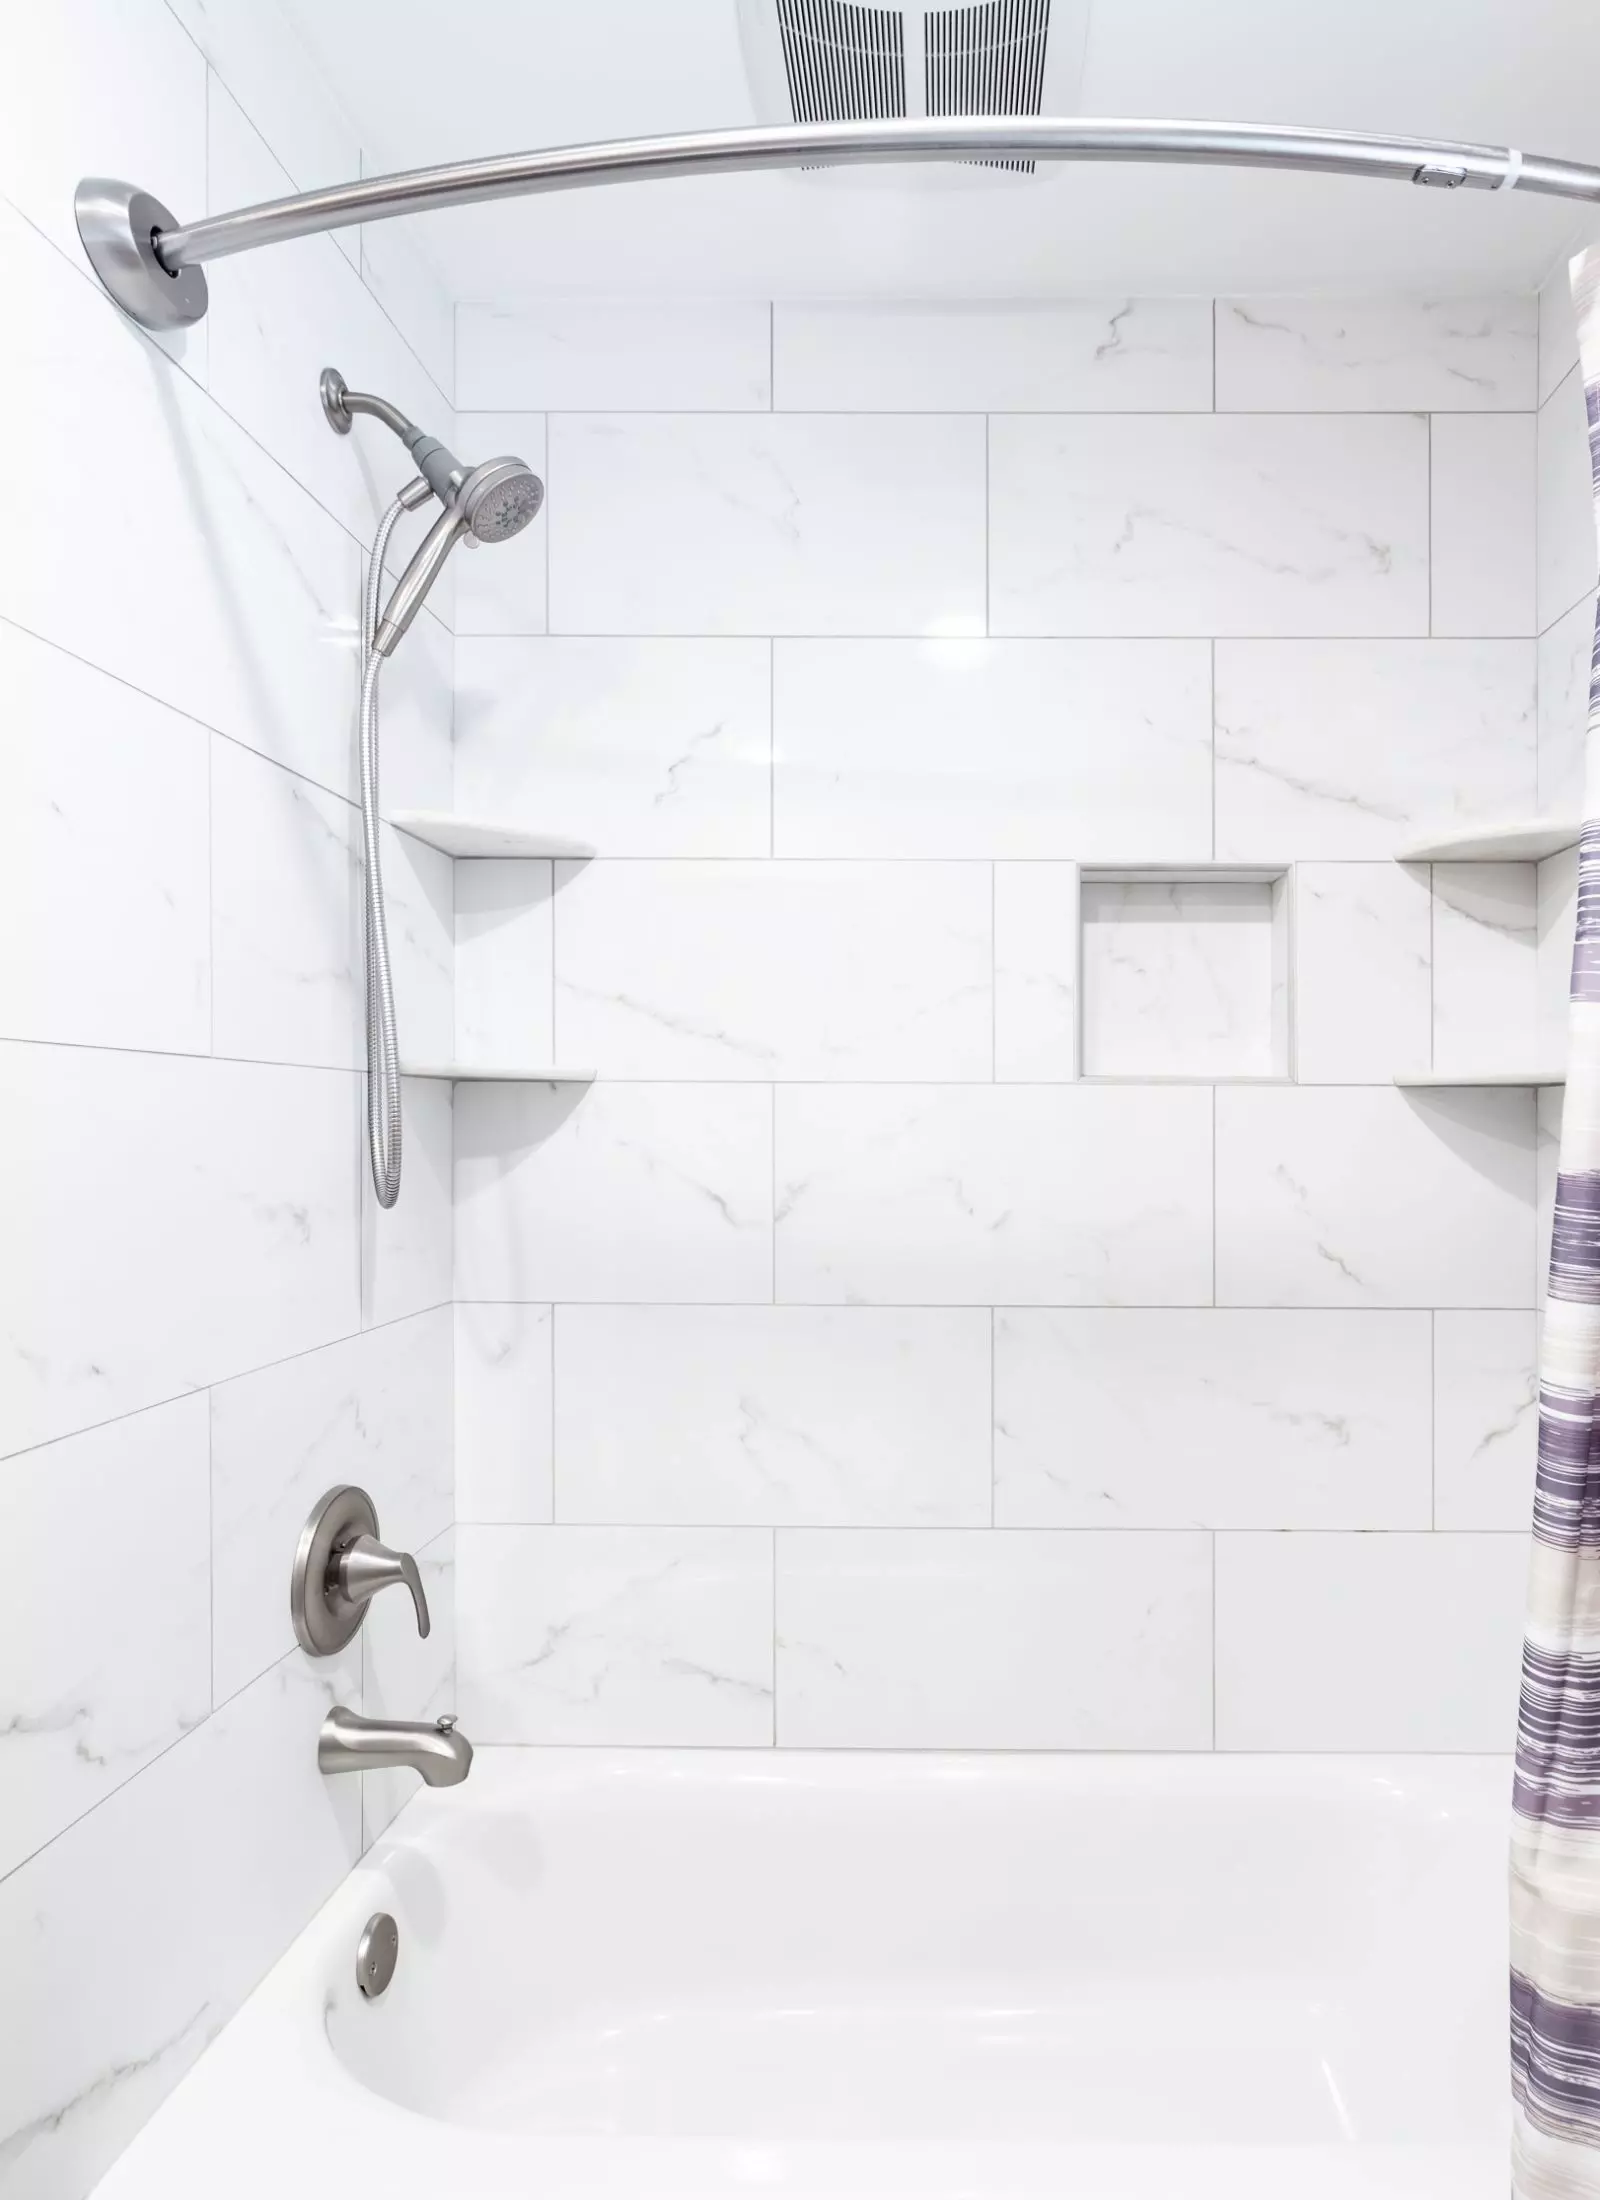 A white tiled bathroom with a purple shower curtain.